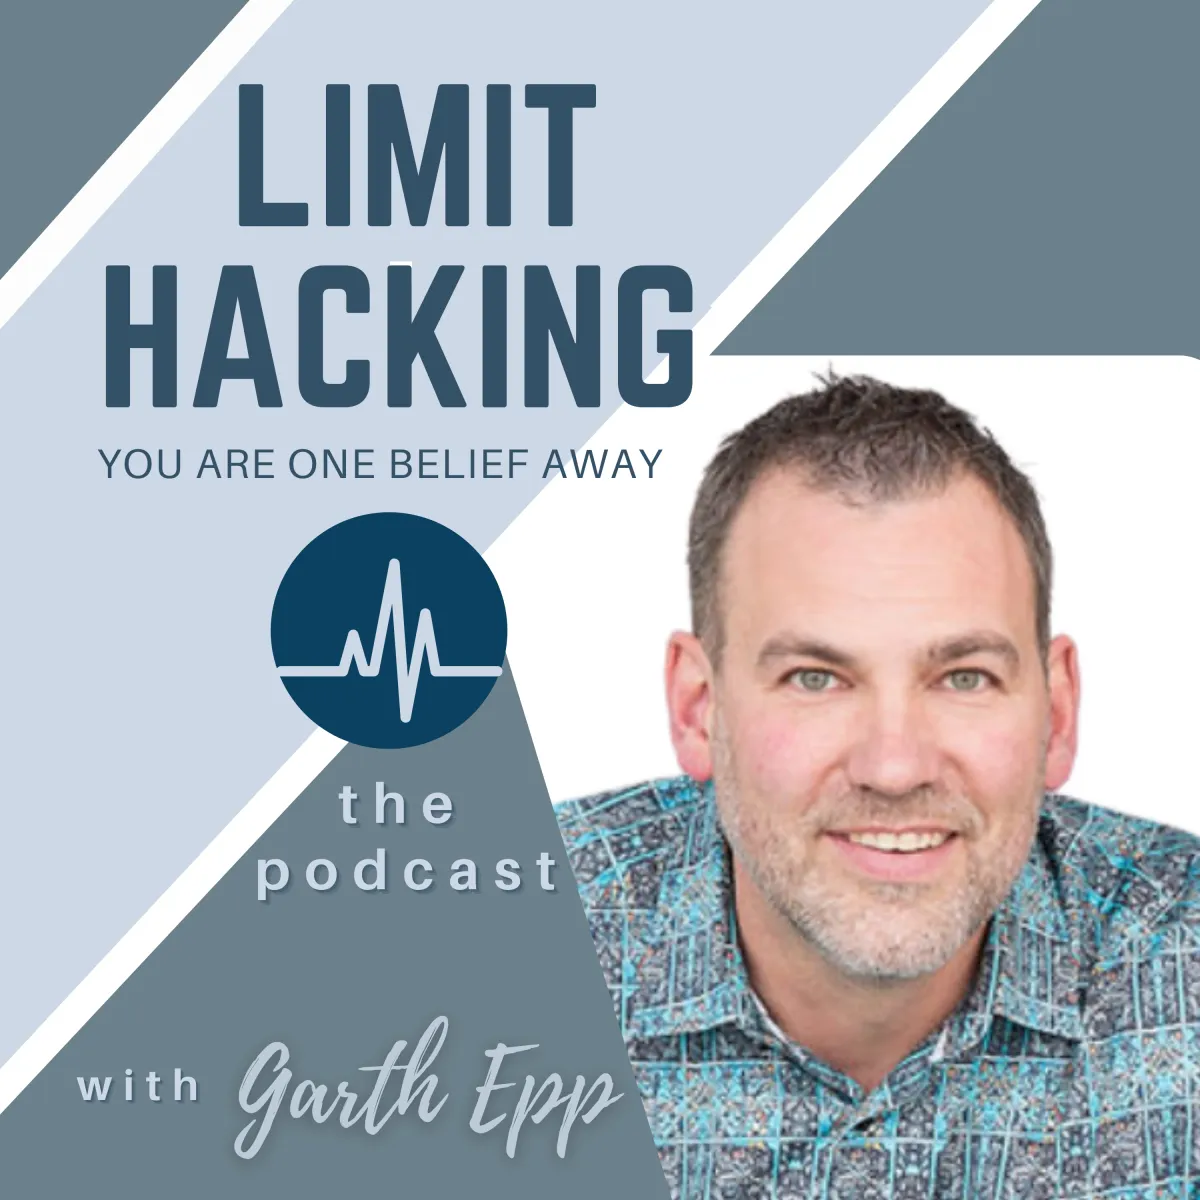 Limit Hacking - You are One Belief Away Podcast - Garth Epp